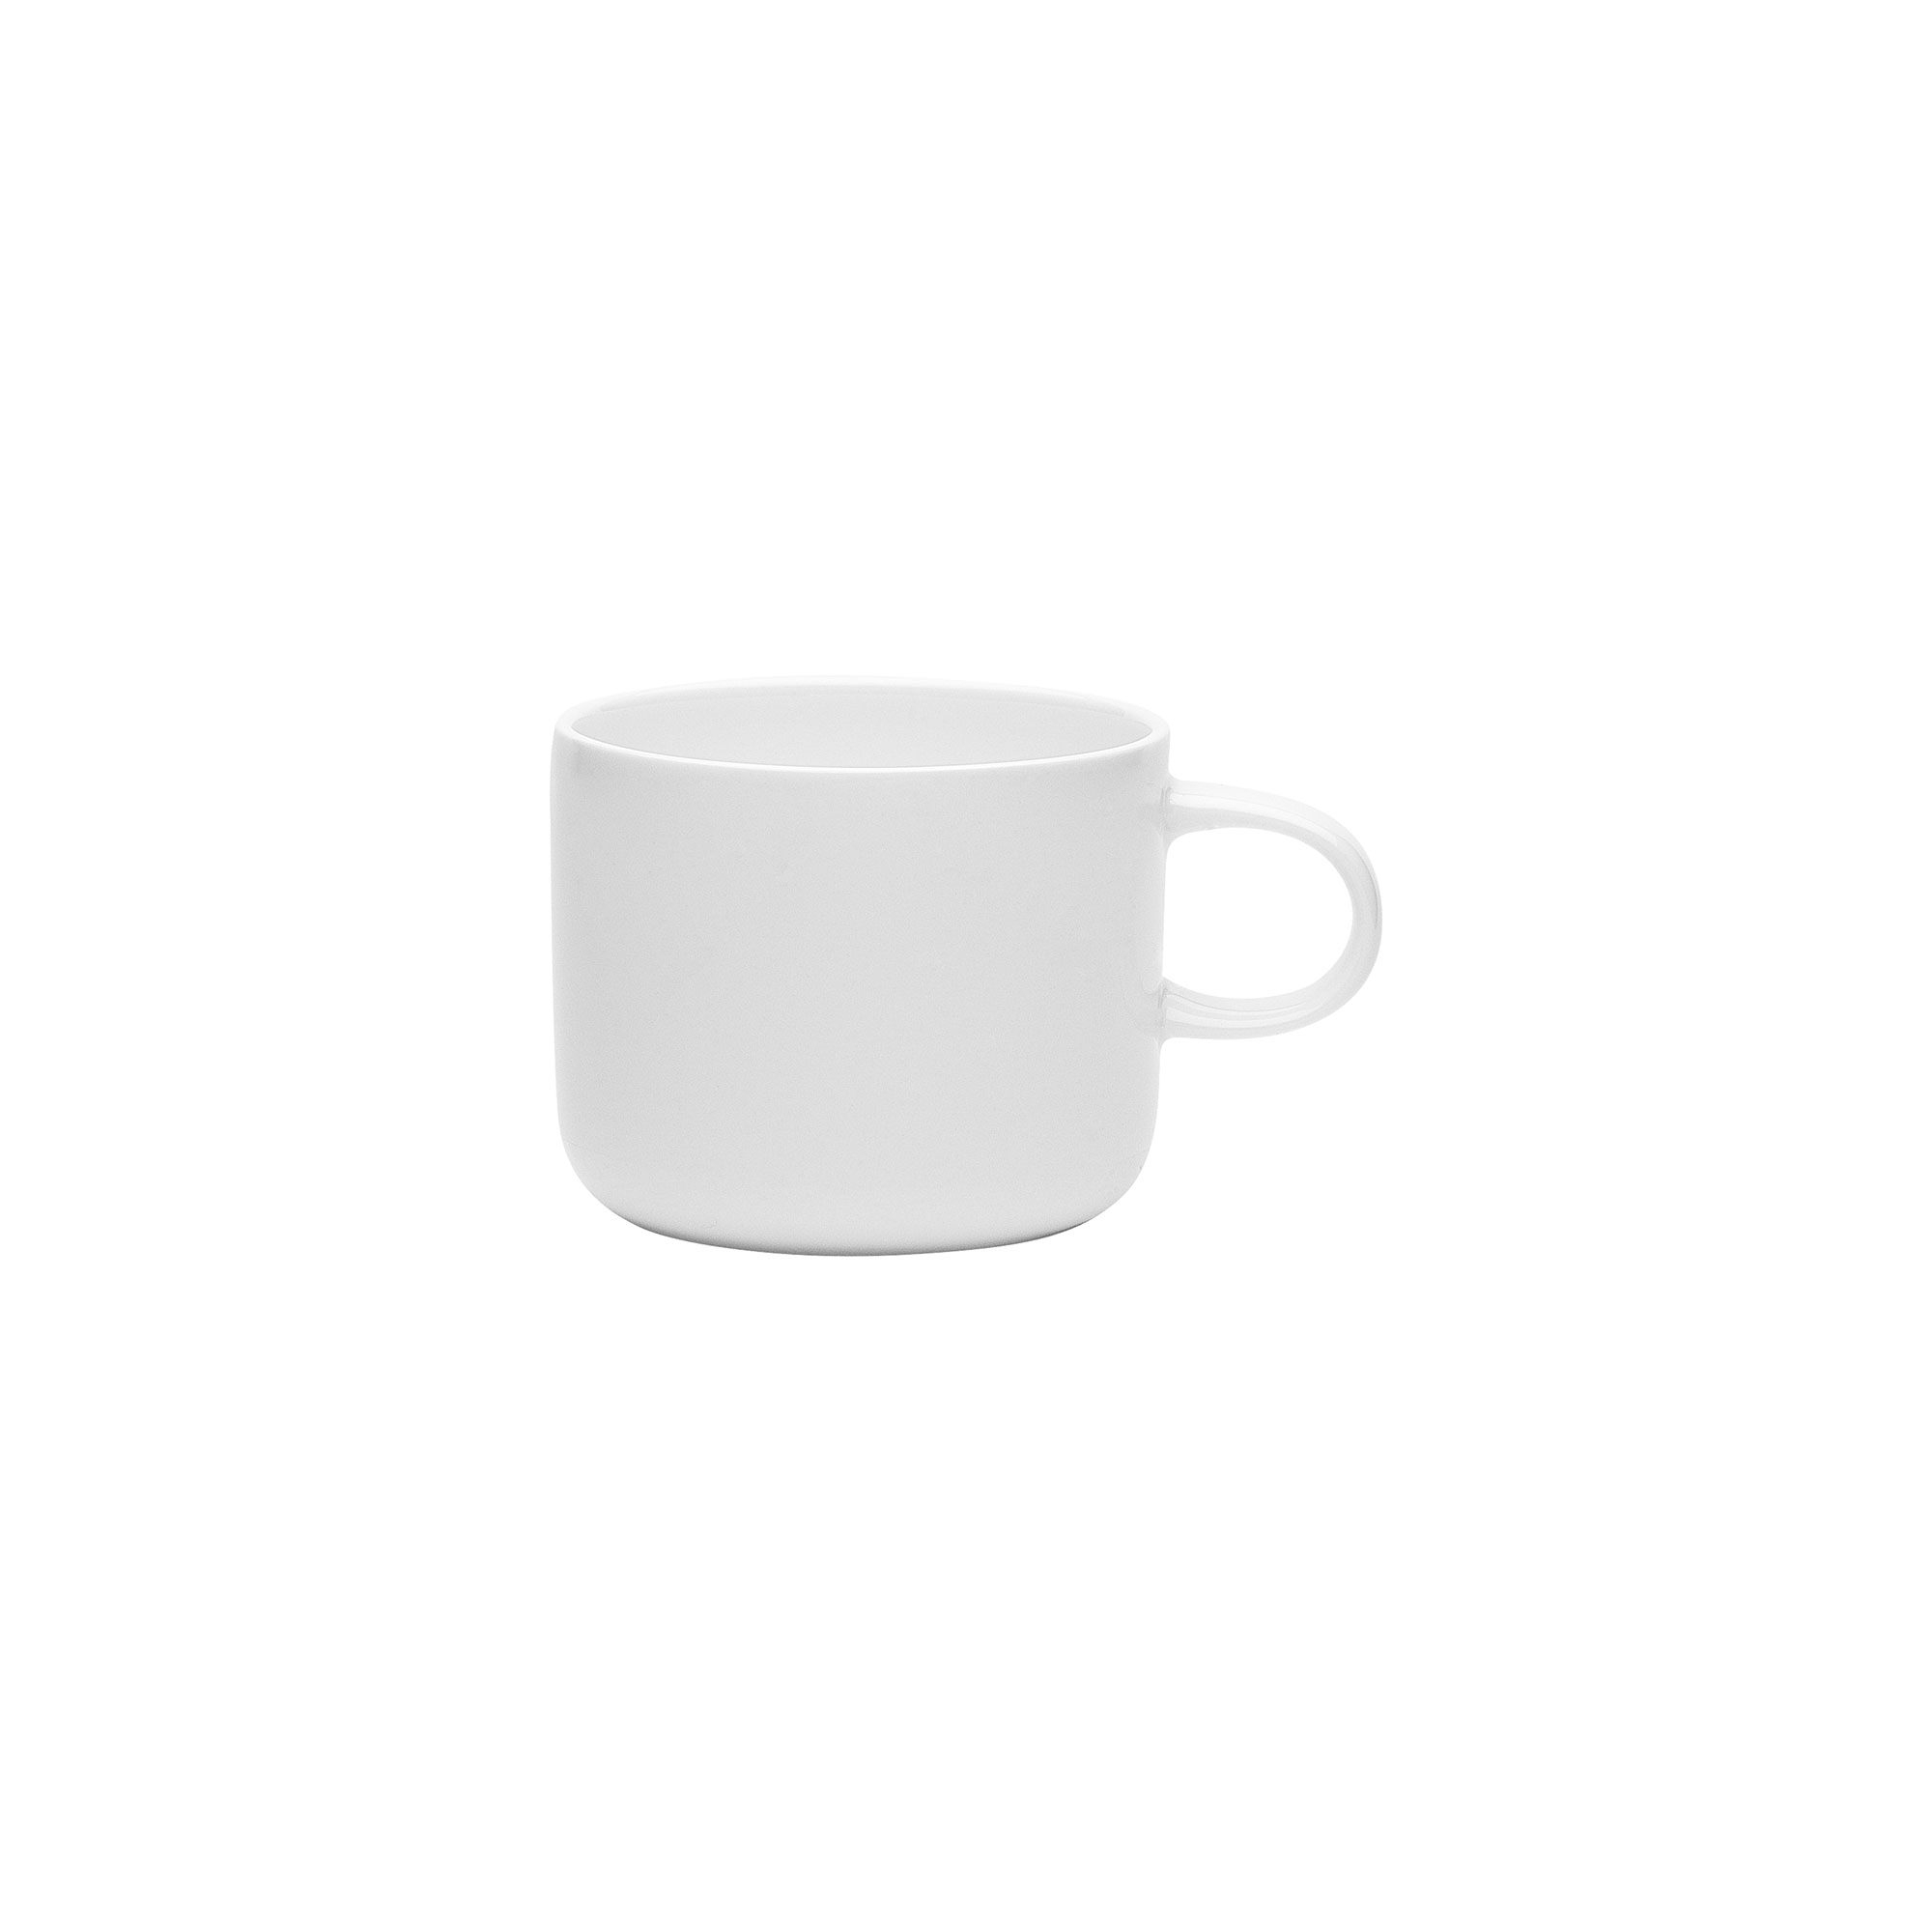 Ecology Canvas Short Espresso Cup 150ml White Image 1